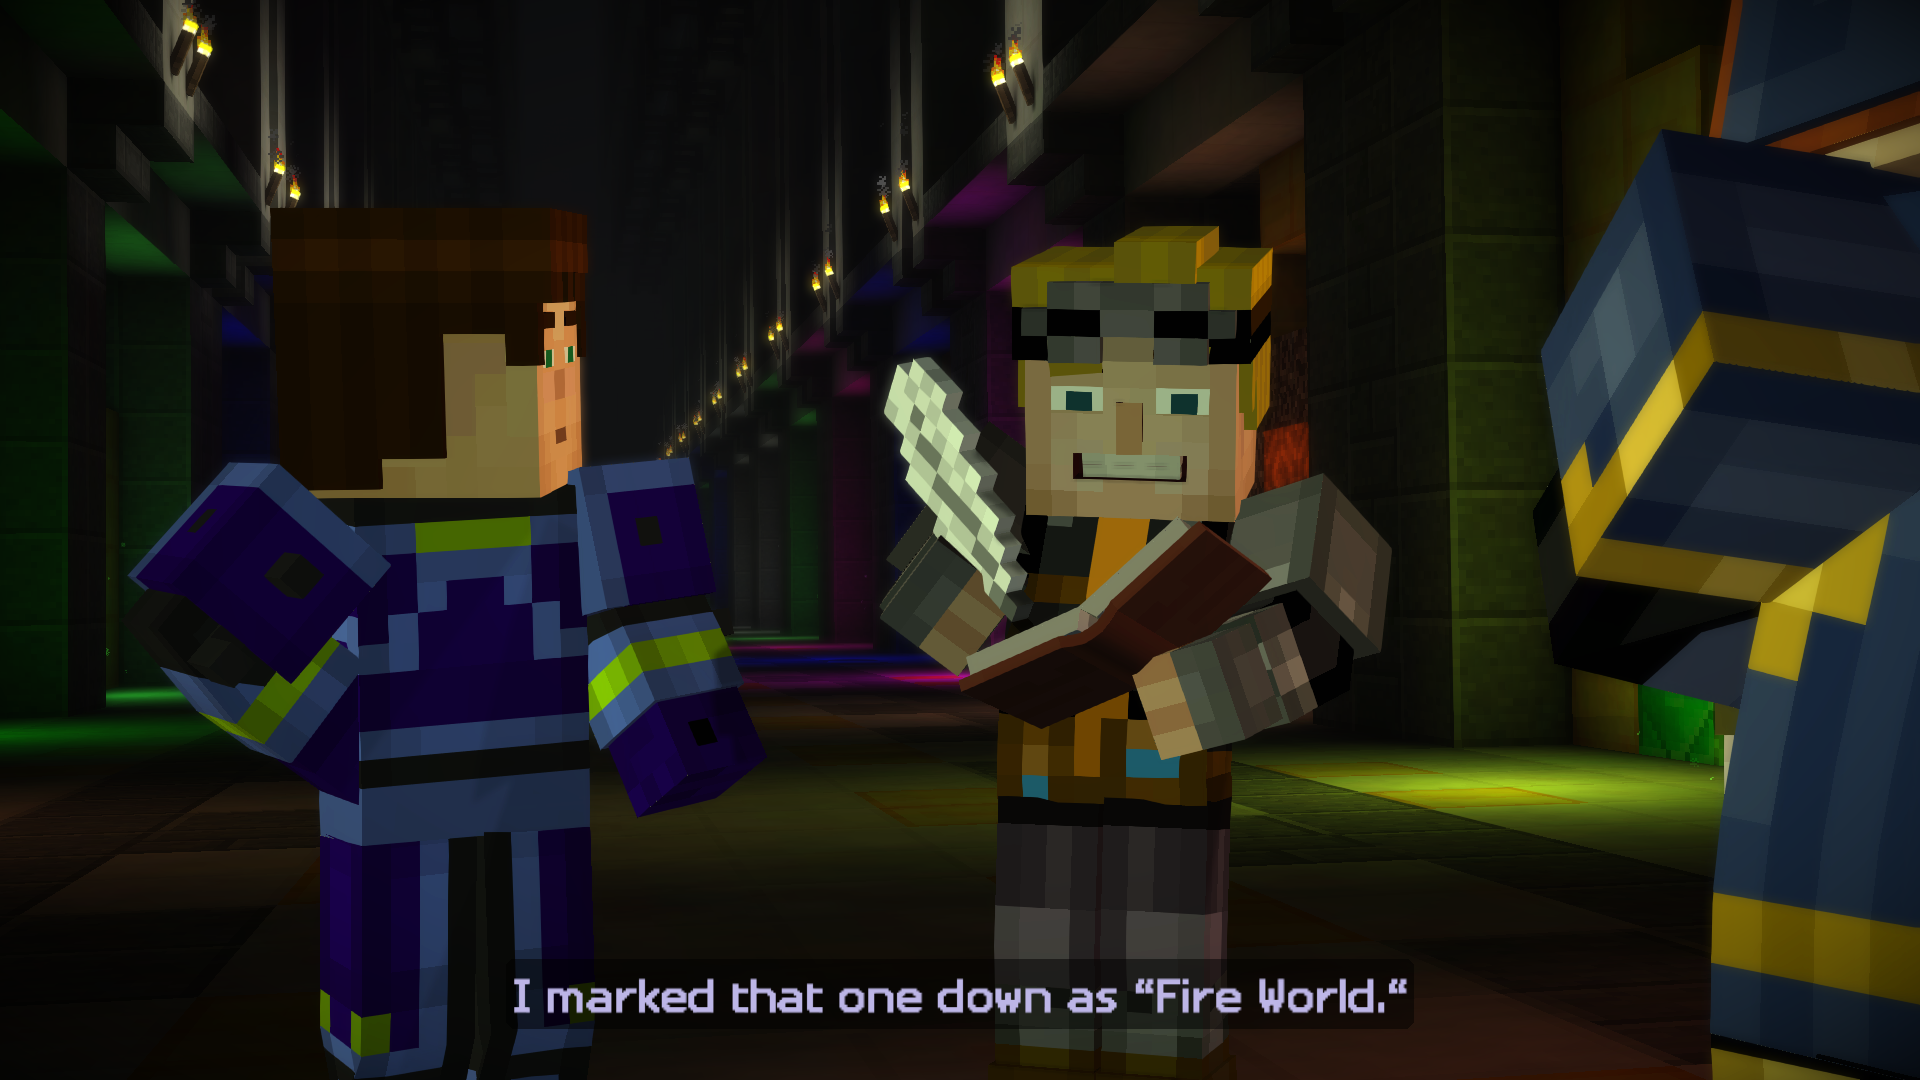 Minecraft: Story Mode' Episode 7, 'Access Denied', Is Ready for Download –  TouchArcade